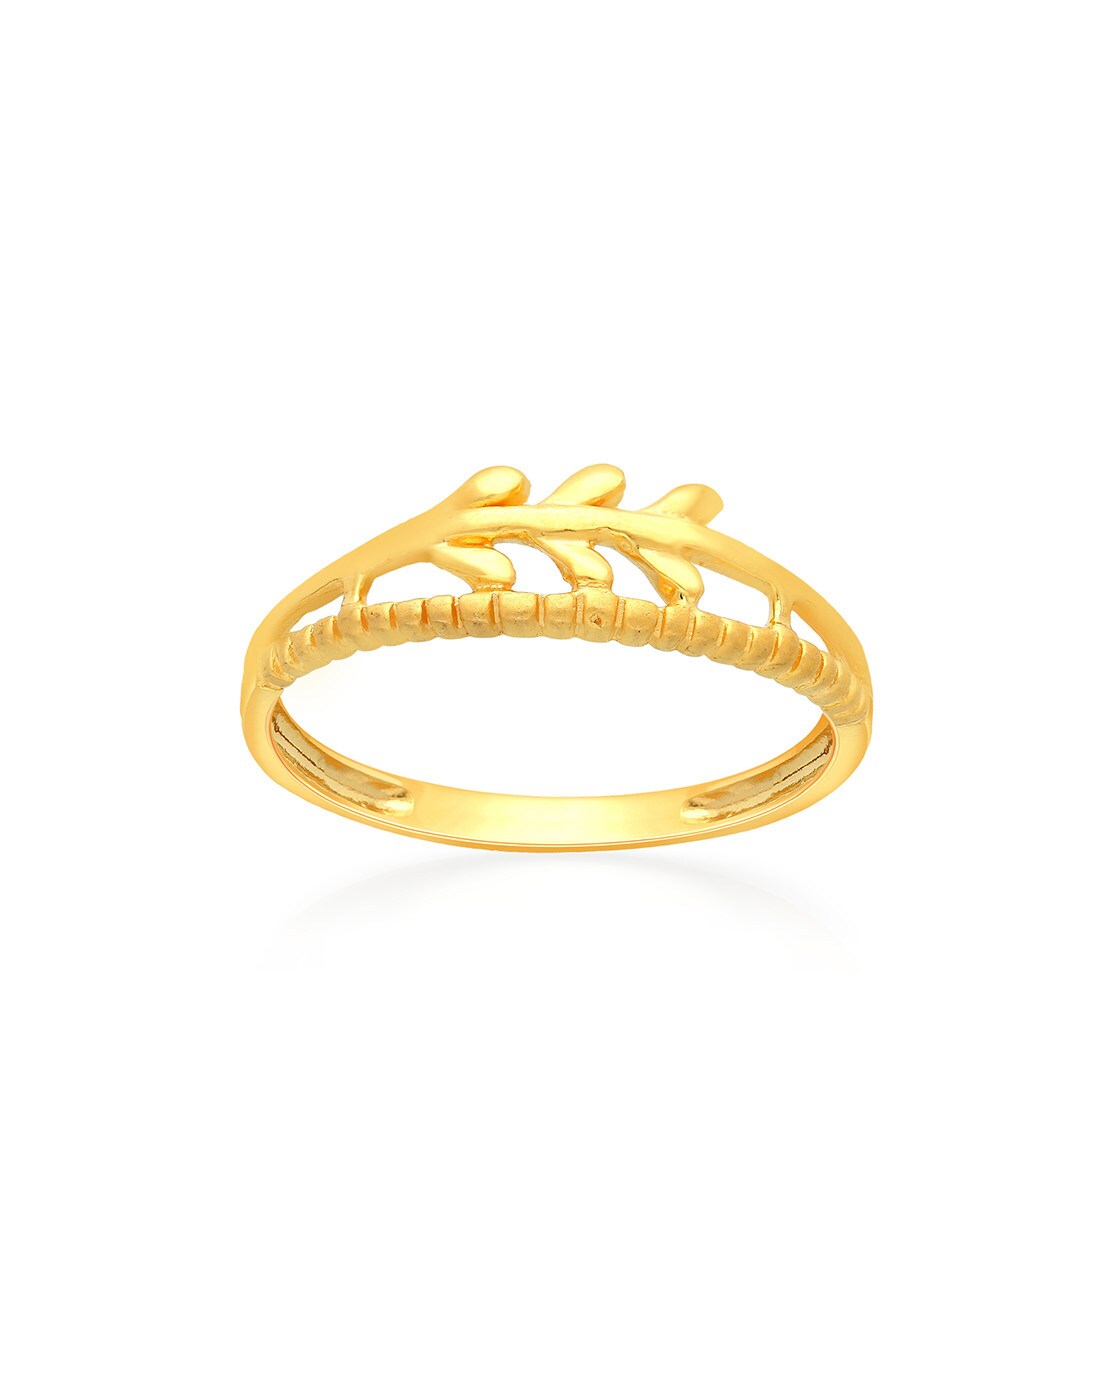 Adjustable Double Leaf Pattern Ring Band In 18K Yellow Gold Filling Perfect  For Weddings, Parties, And Gifts From Bloomy_gift, $5.03 | DHgate.Com